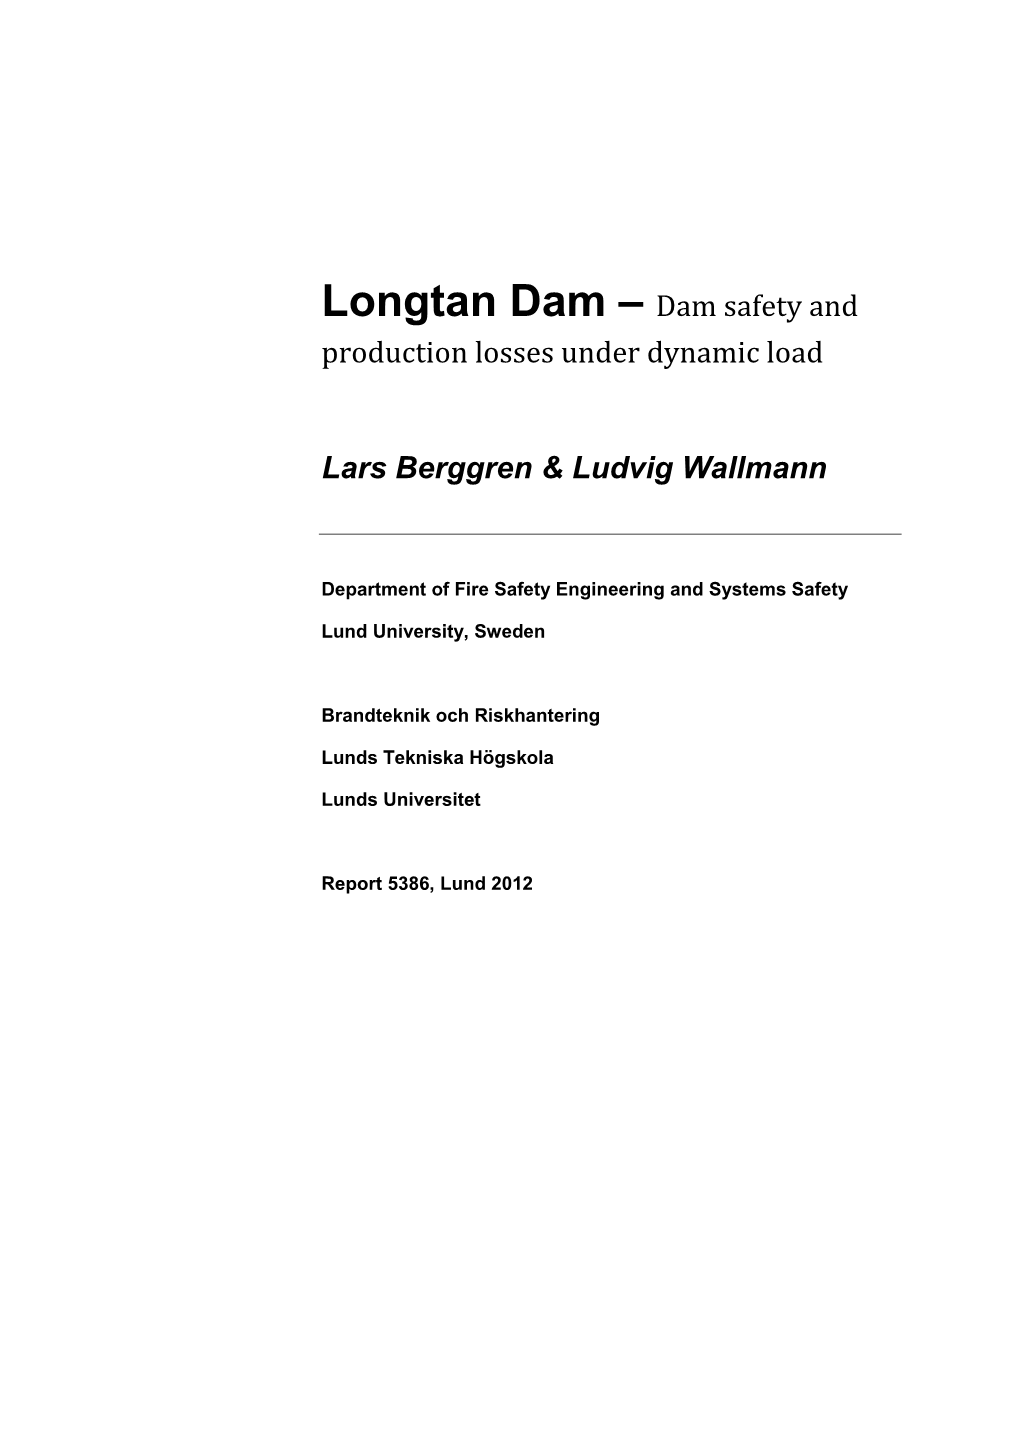 Longtan Dam – Dam Safety and Production Losses Under Dynamic Load